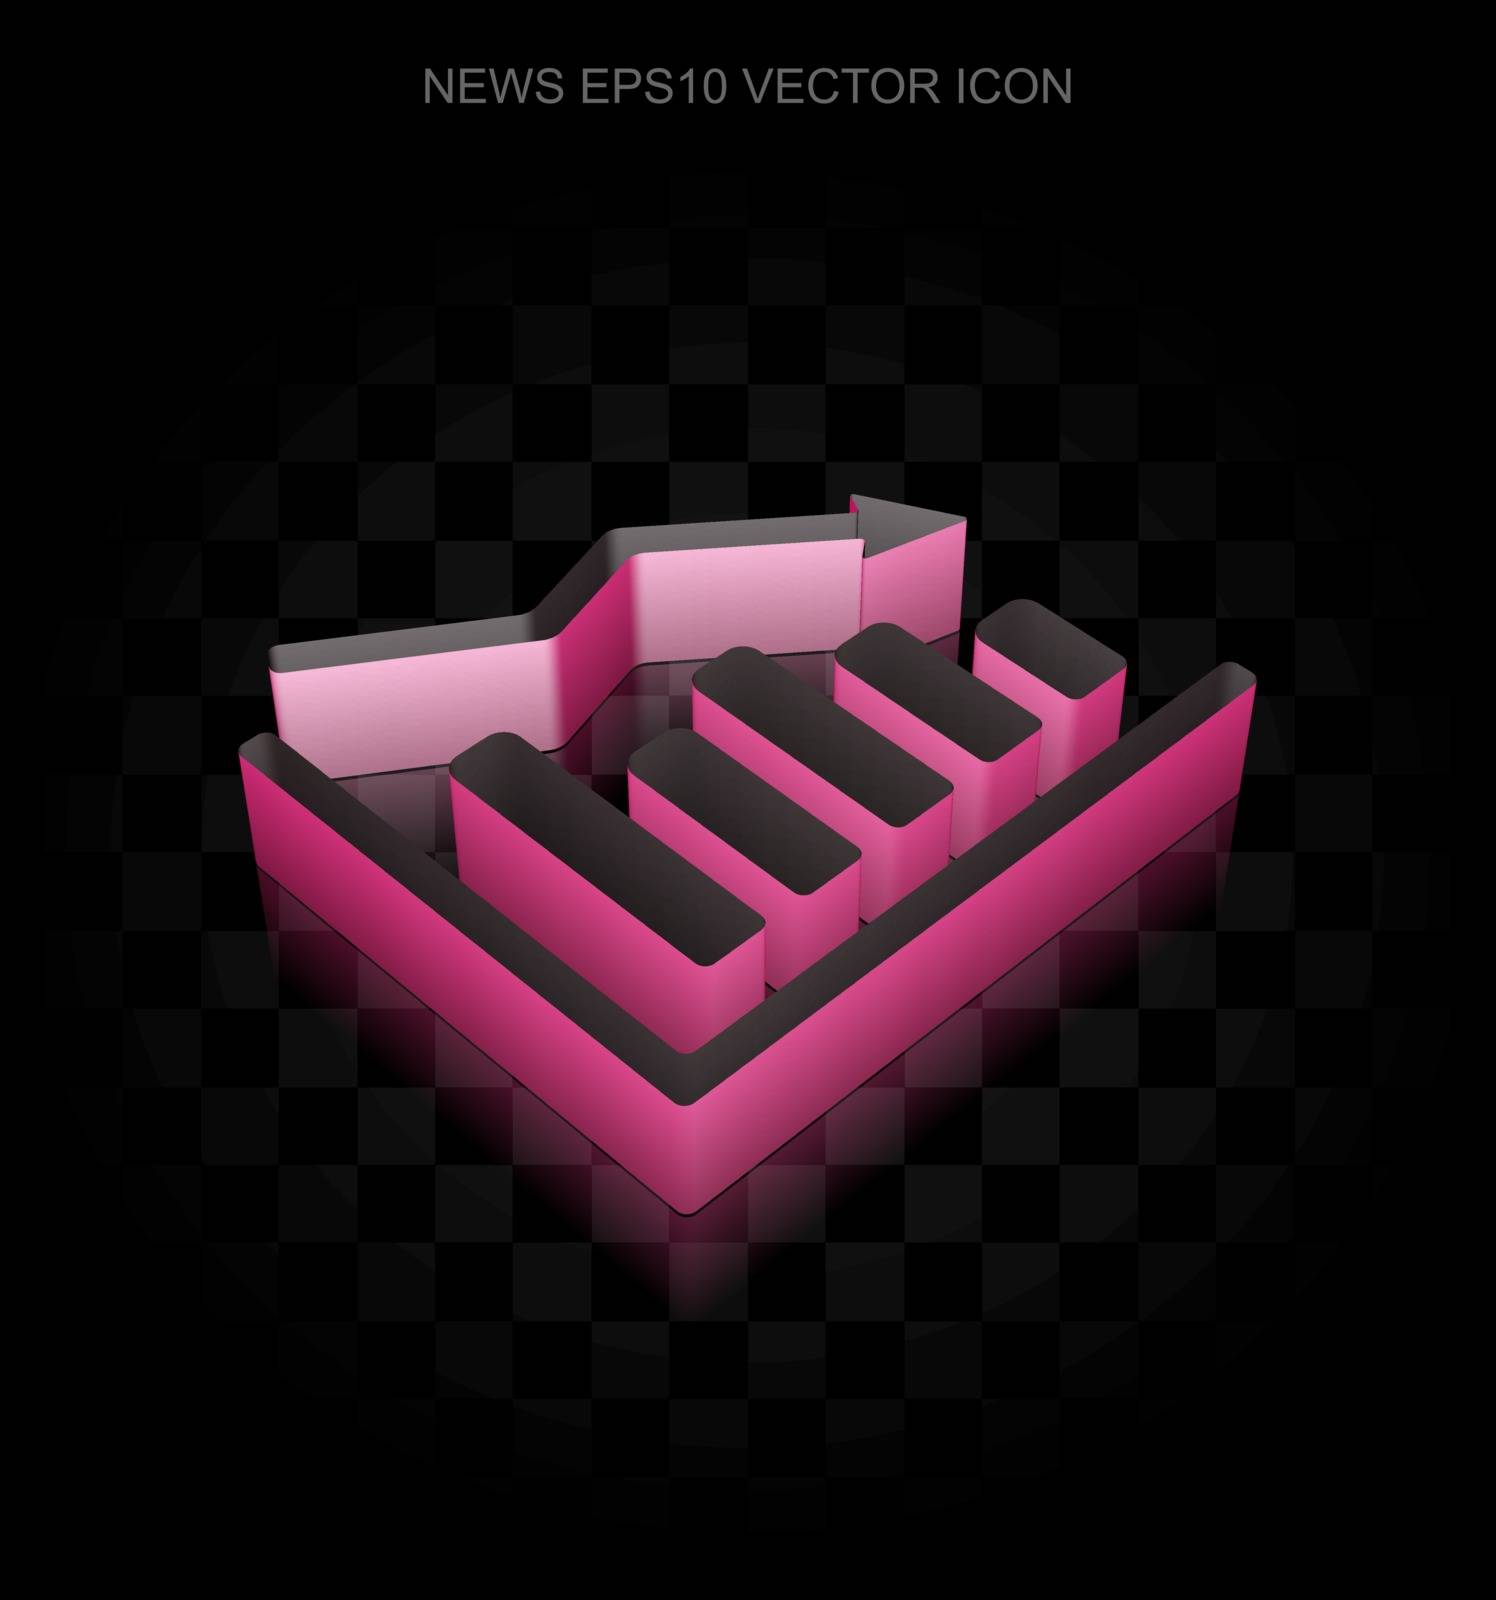 News icon: Crimson 3d Decline Graph made of paper tape on black background, transparent shadow, EPS 10 vector illustration.